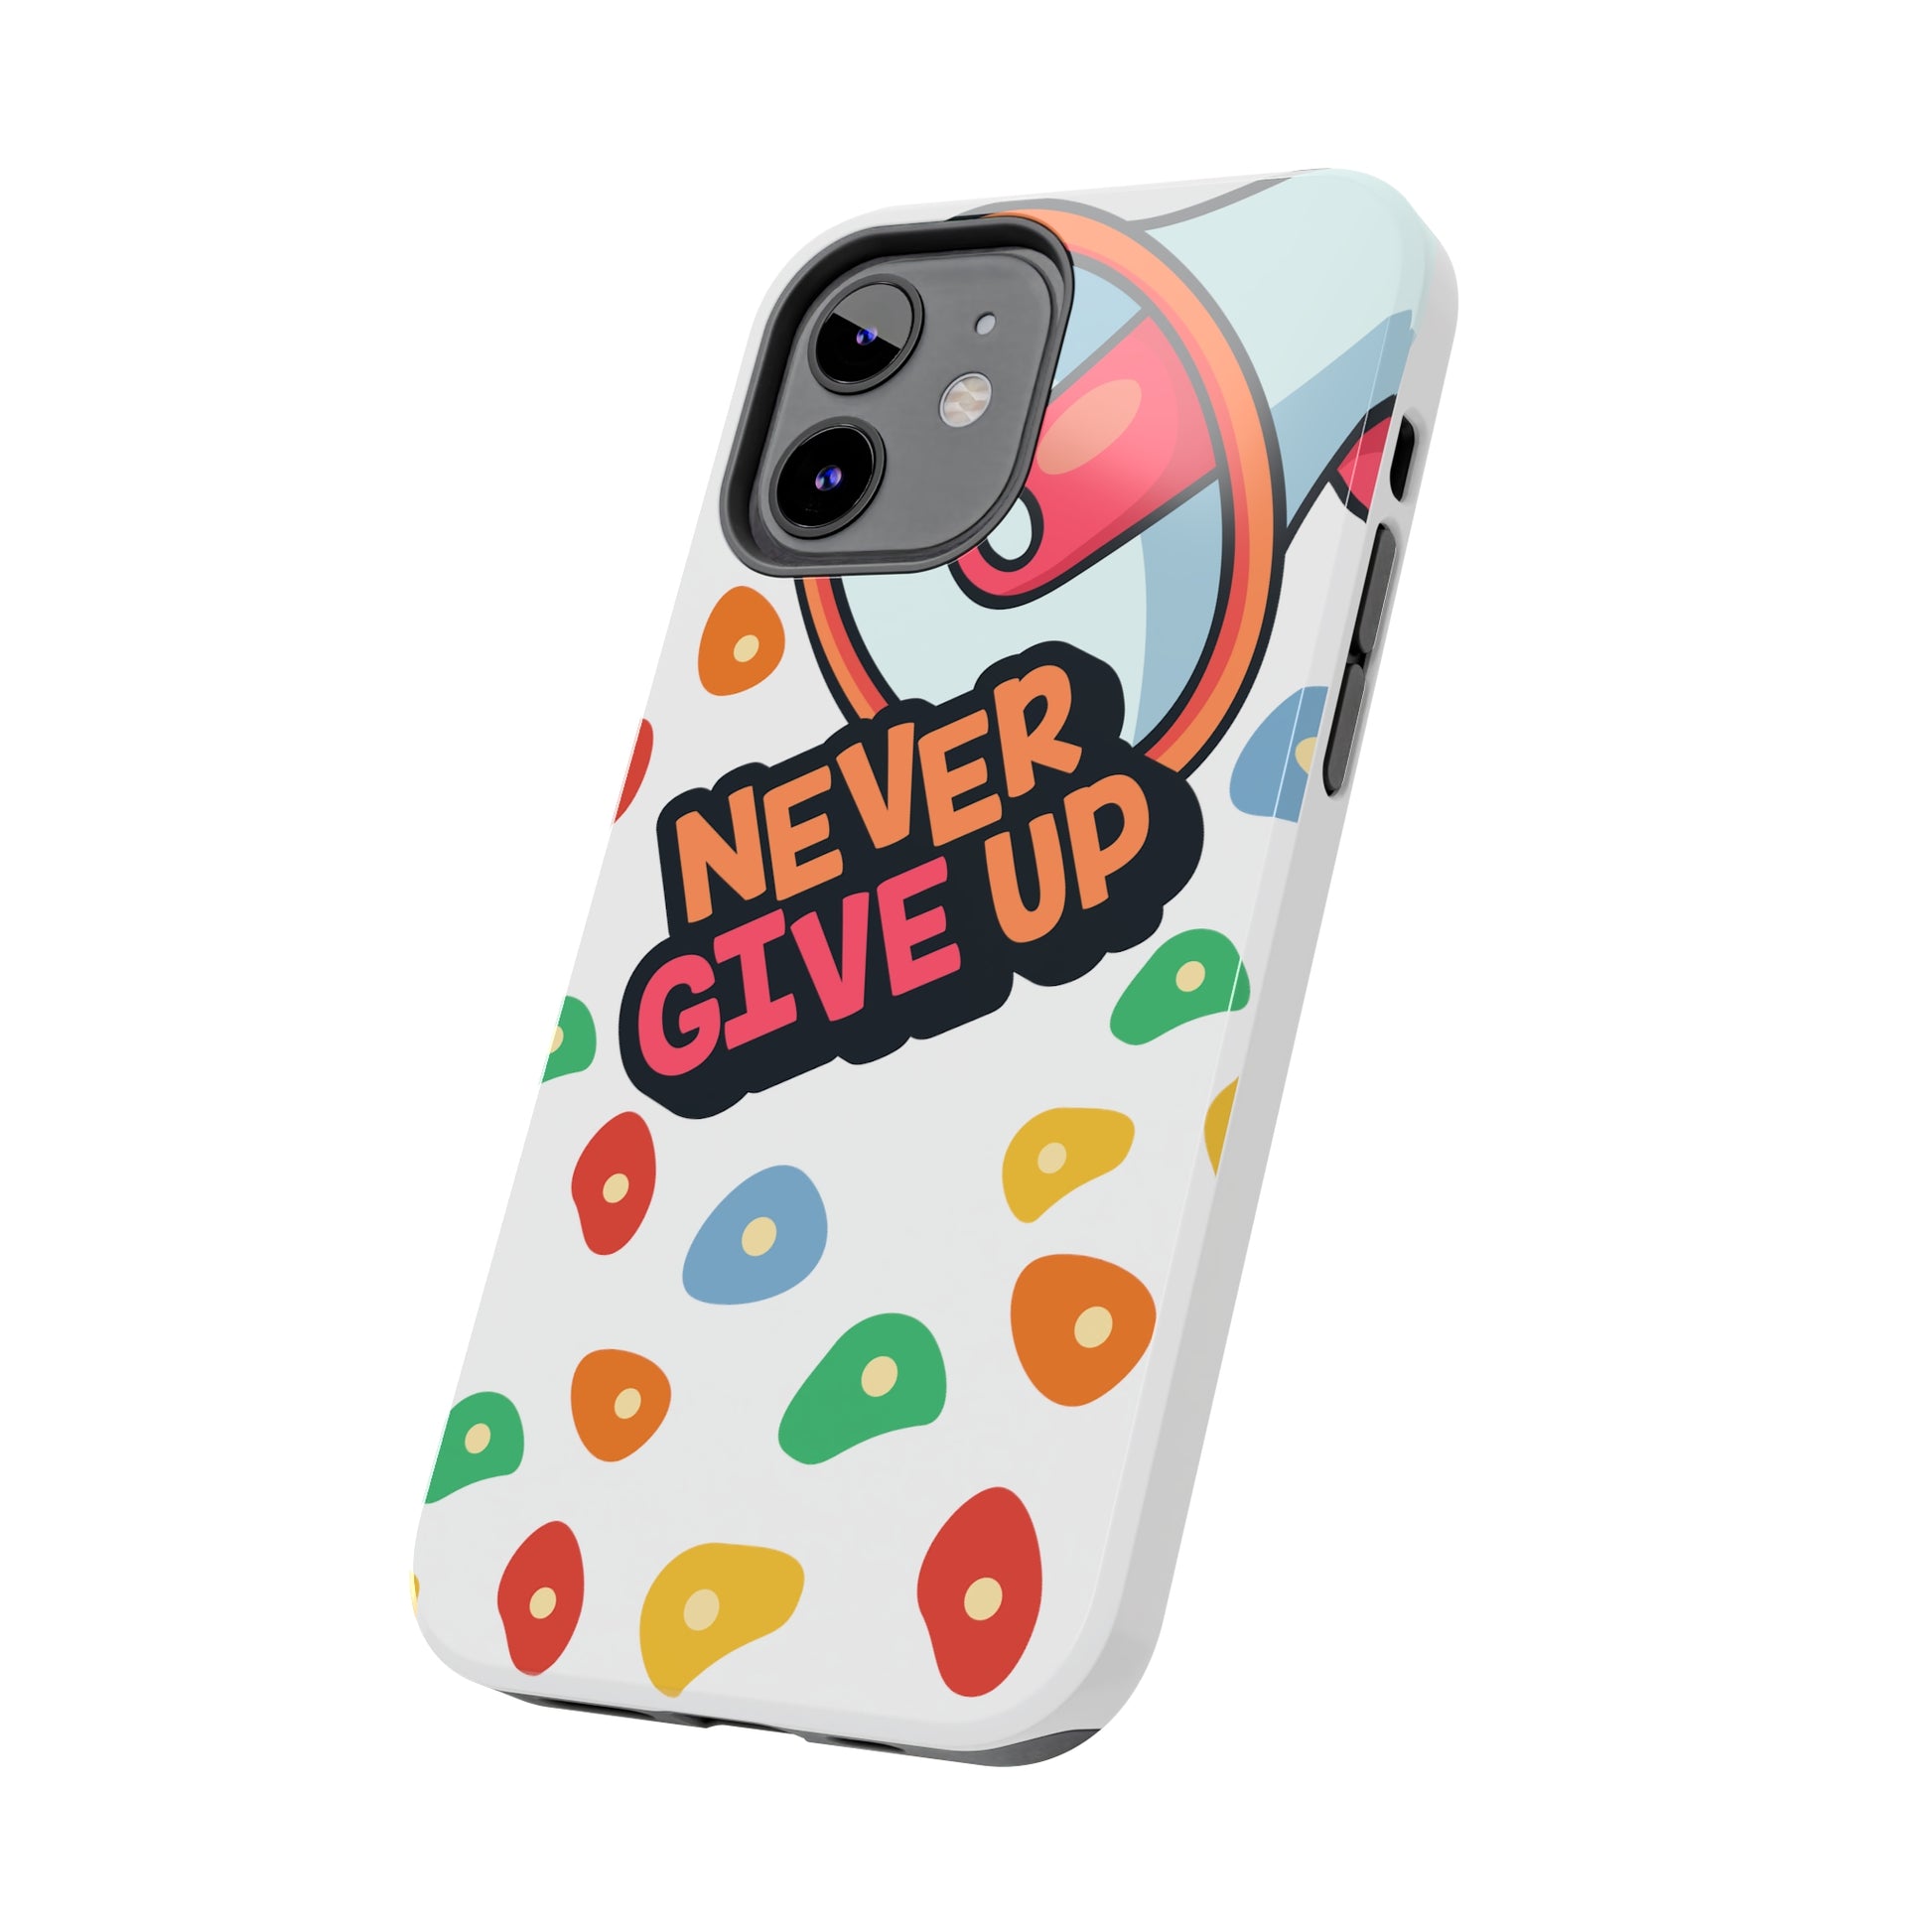 Never Give Up: iPhone - Tough iPhone Case Design - Wireless Charging - Superior Protection - Original Designs by TheGlassyLass.com